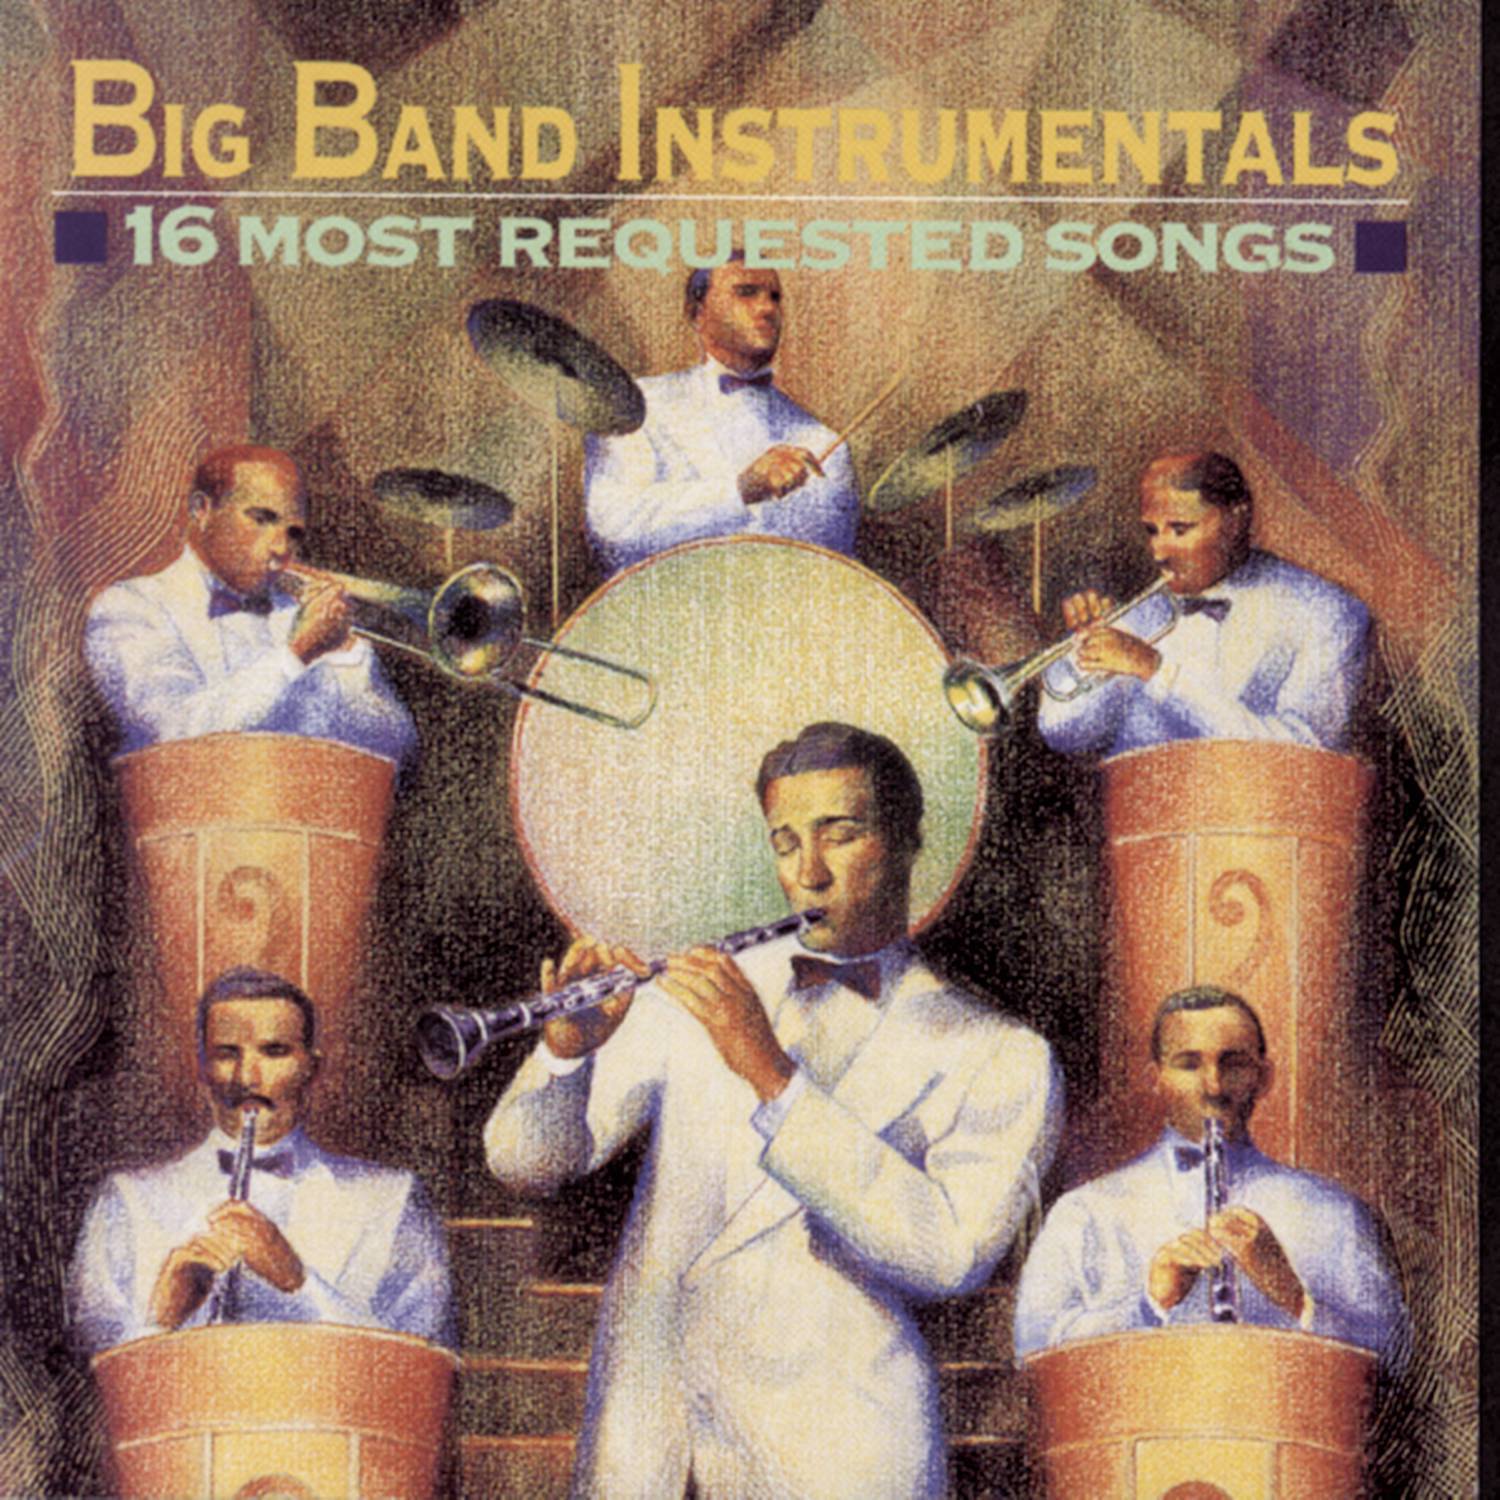 Big Band instrumentals: 16 Most Requested Songs